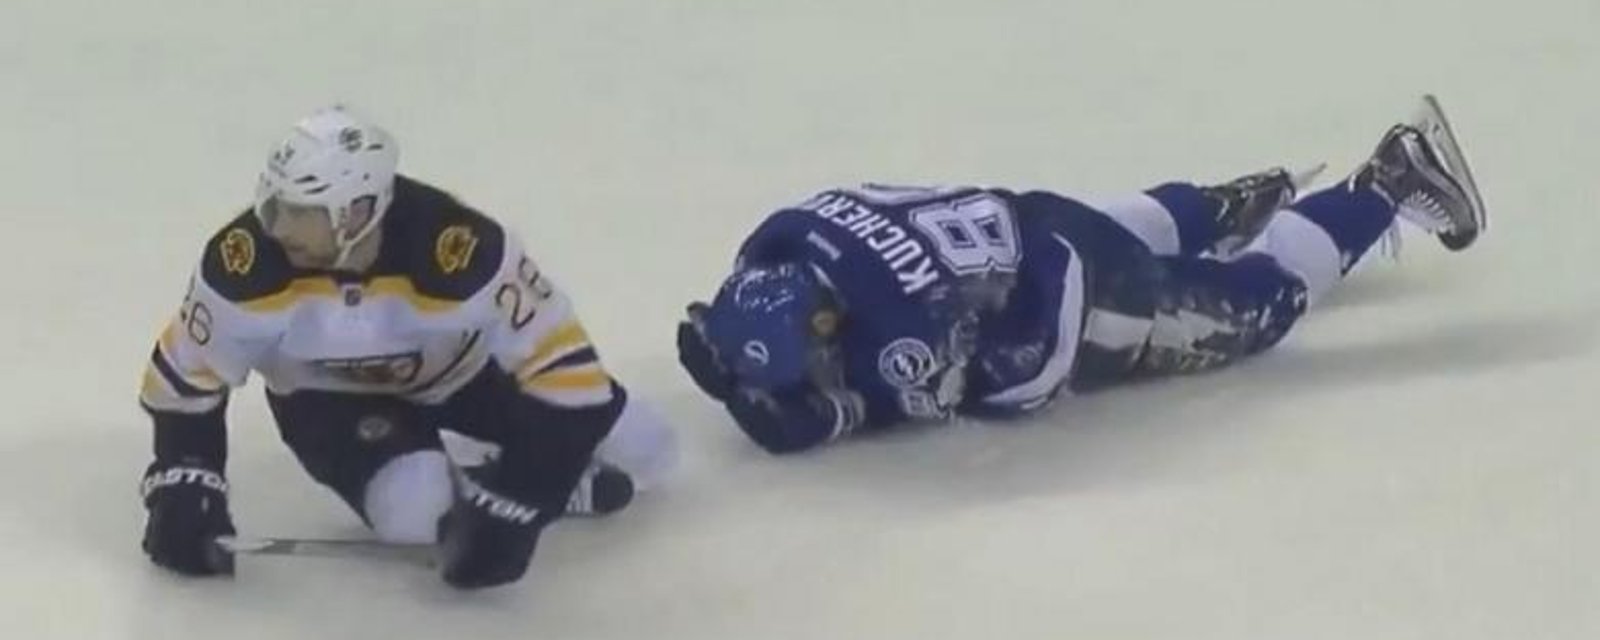 Kucherov gets destroyed by a big forearm to the head.